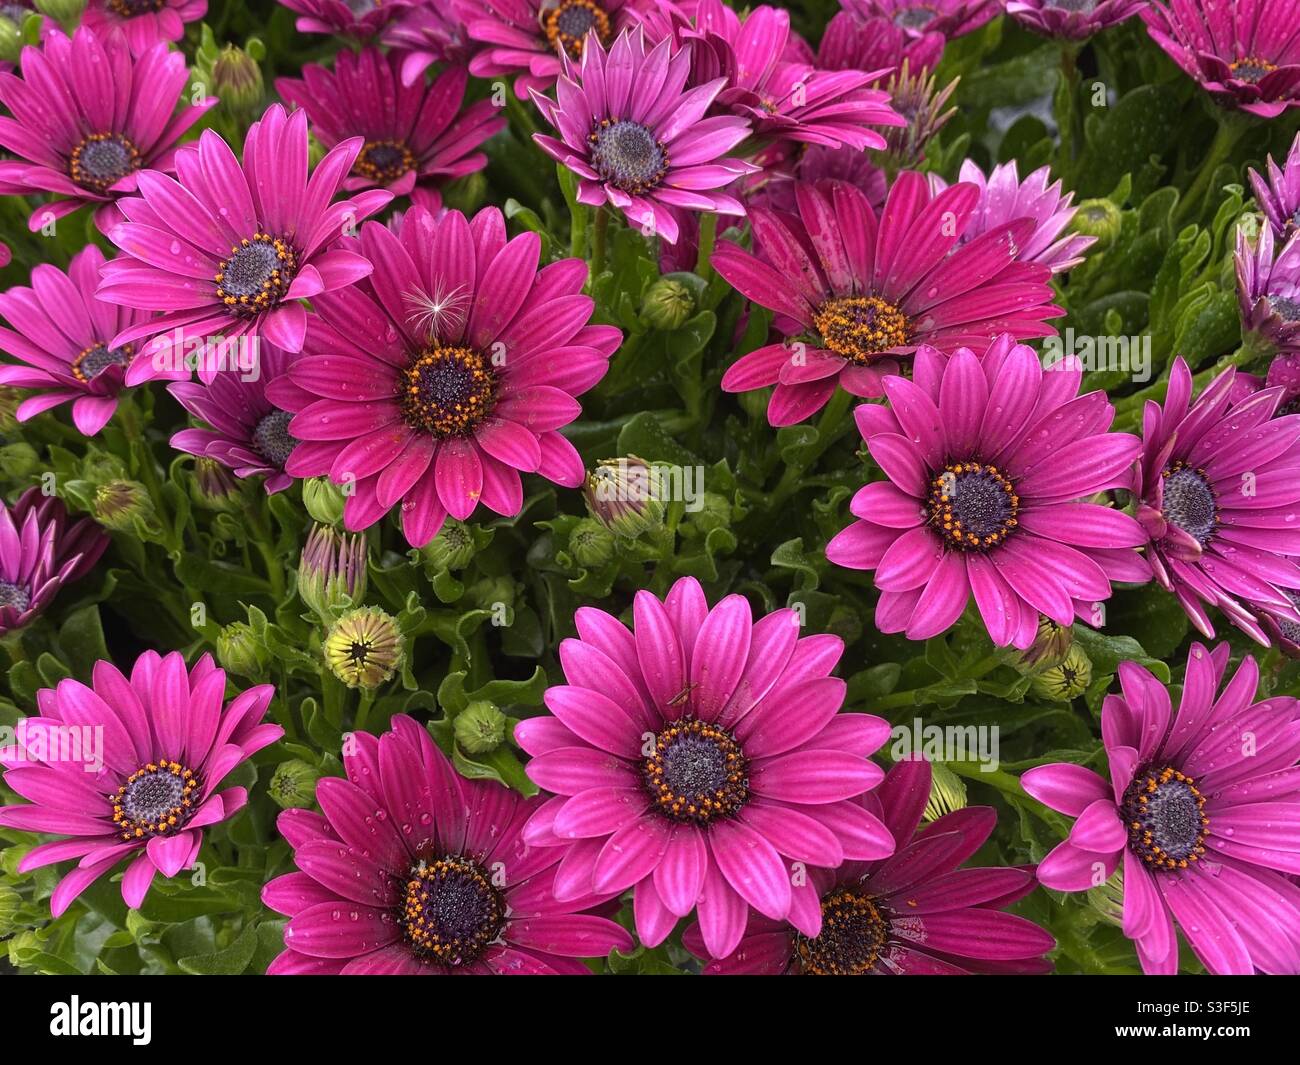 Vibrant close up images of beautiful pink flowers in summer Stock Photo